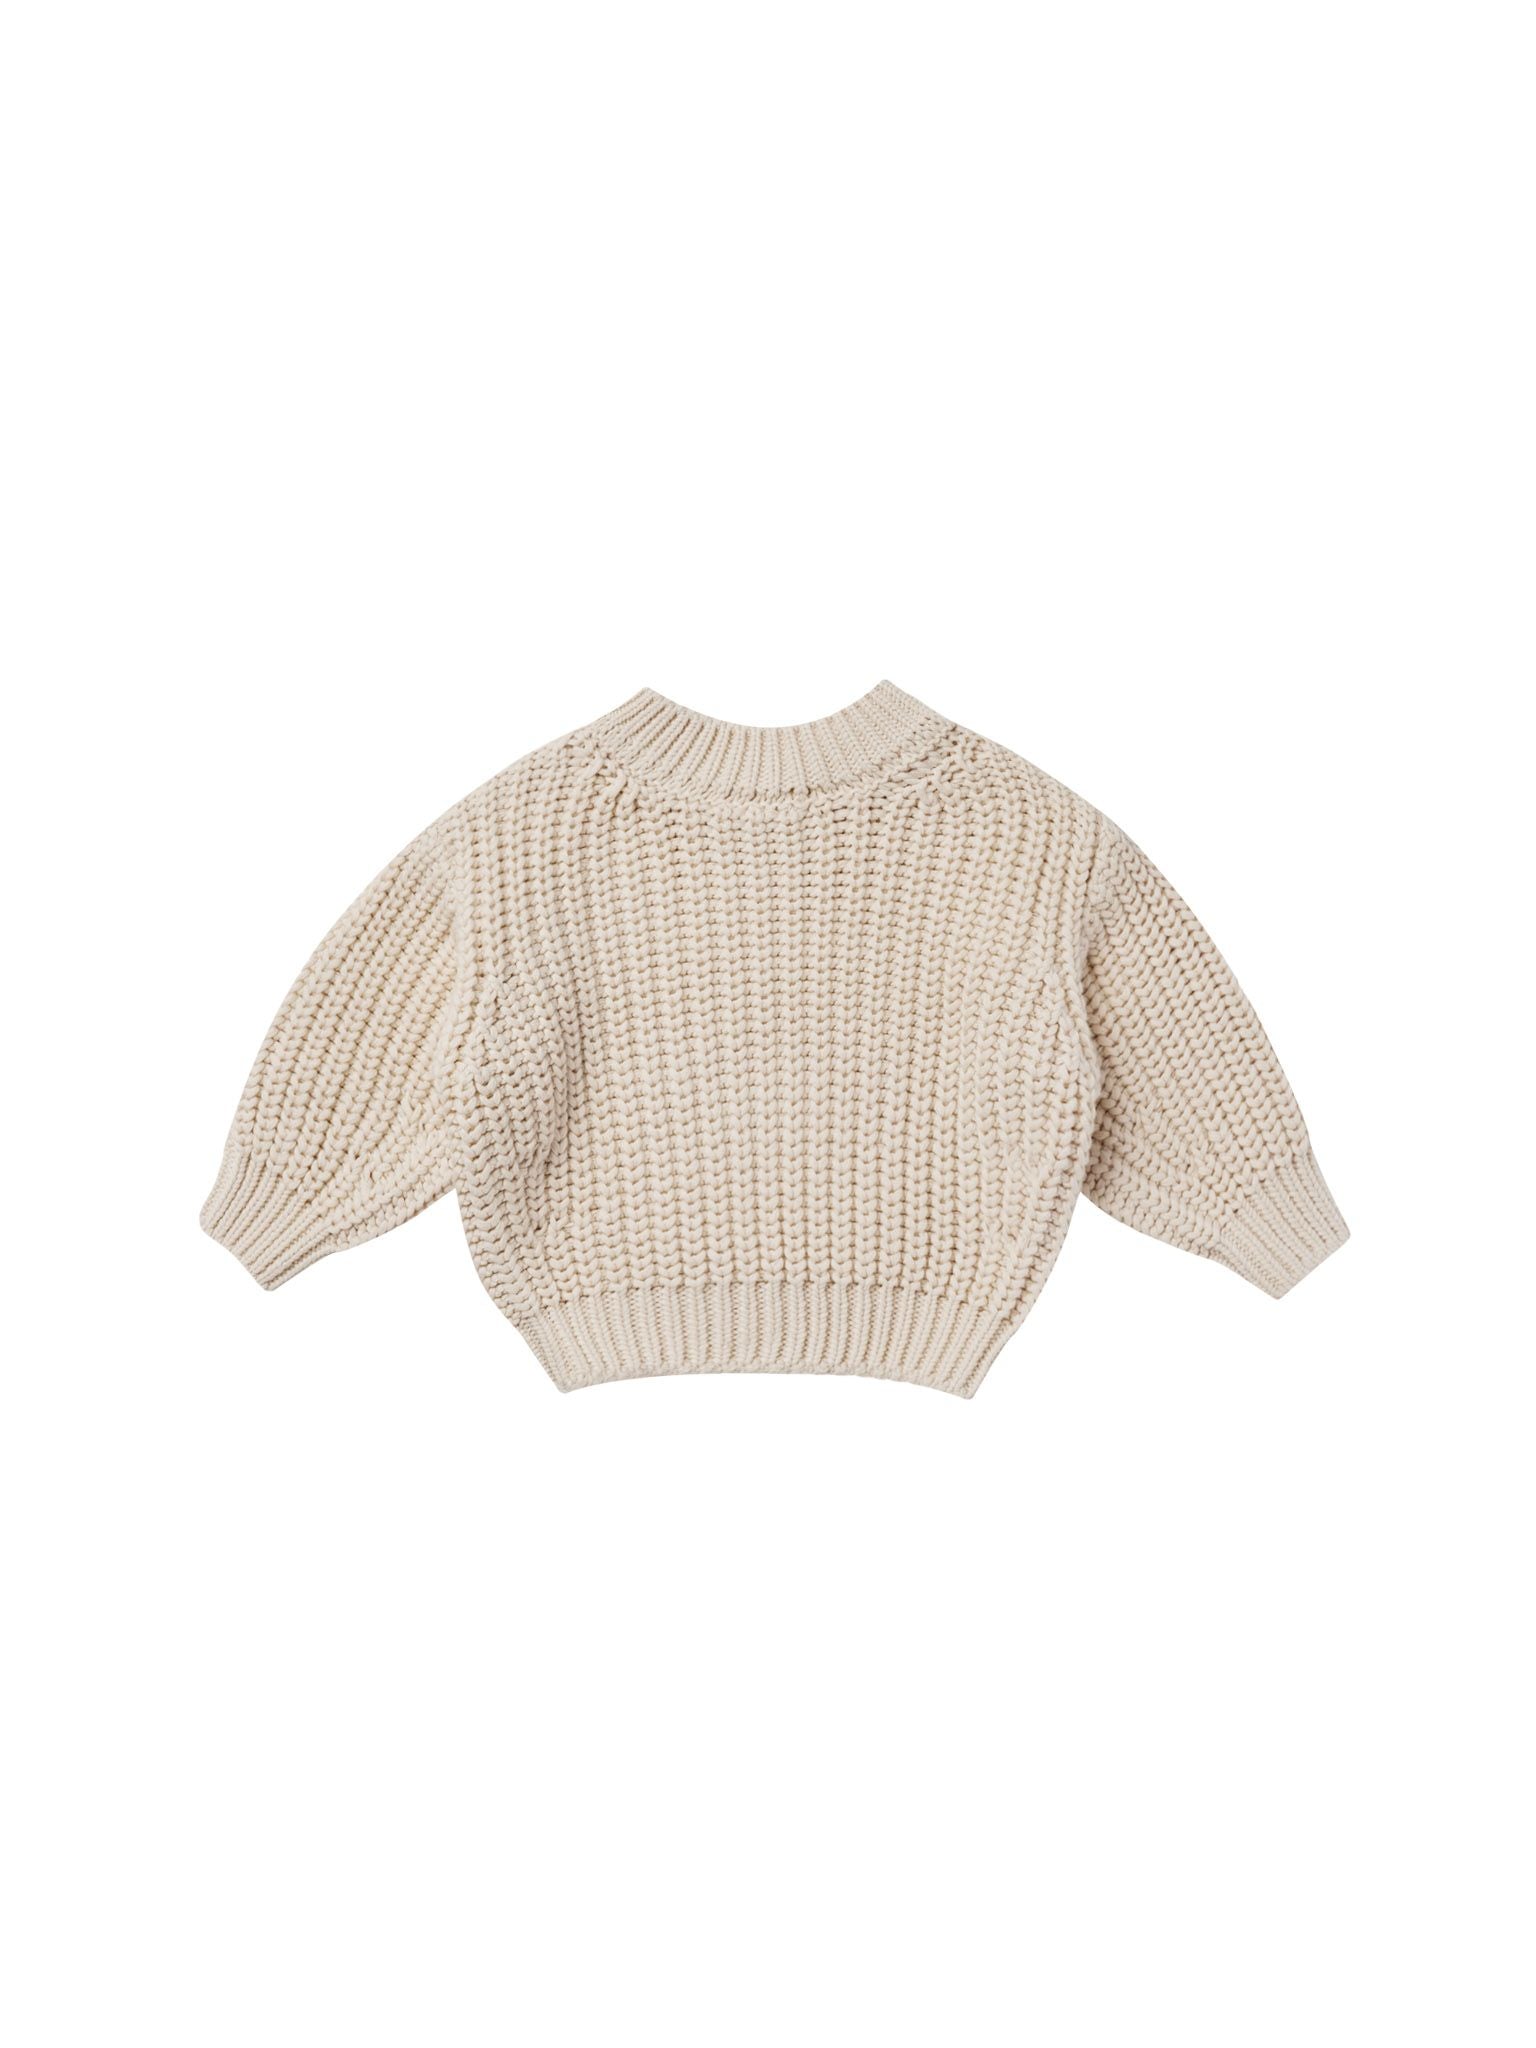 CHUNKY KNIT SWEATER | NATURAL - LAST 6/12M & 18/24M